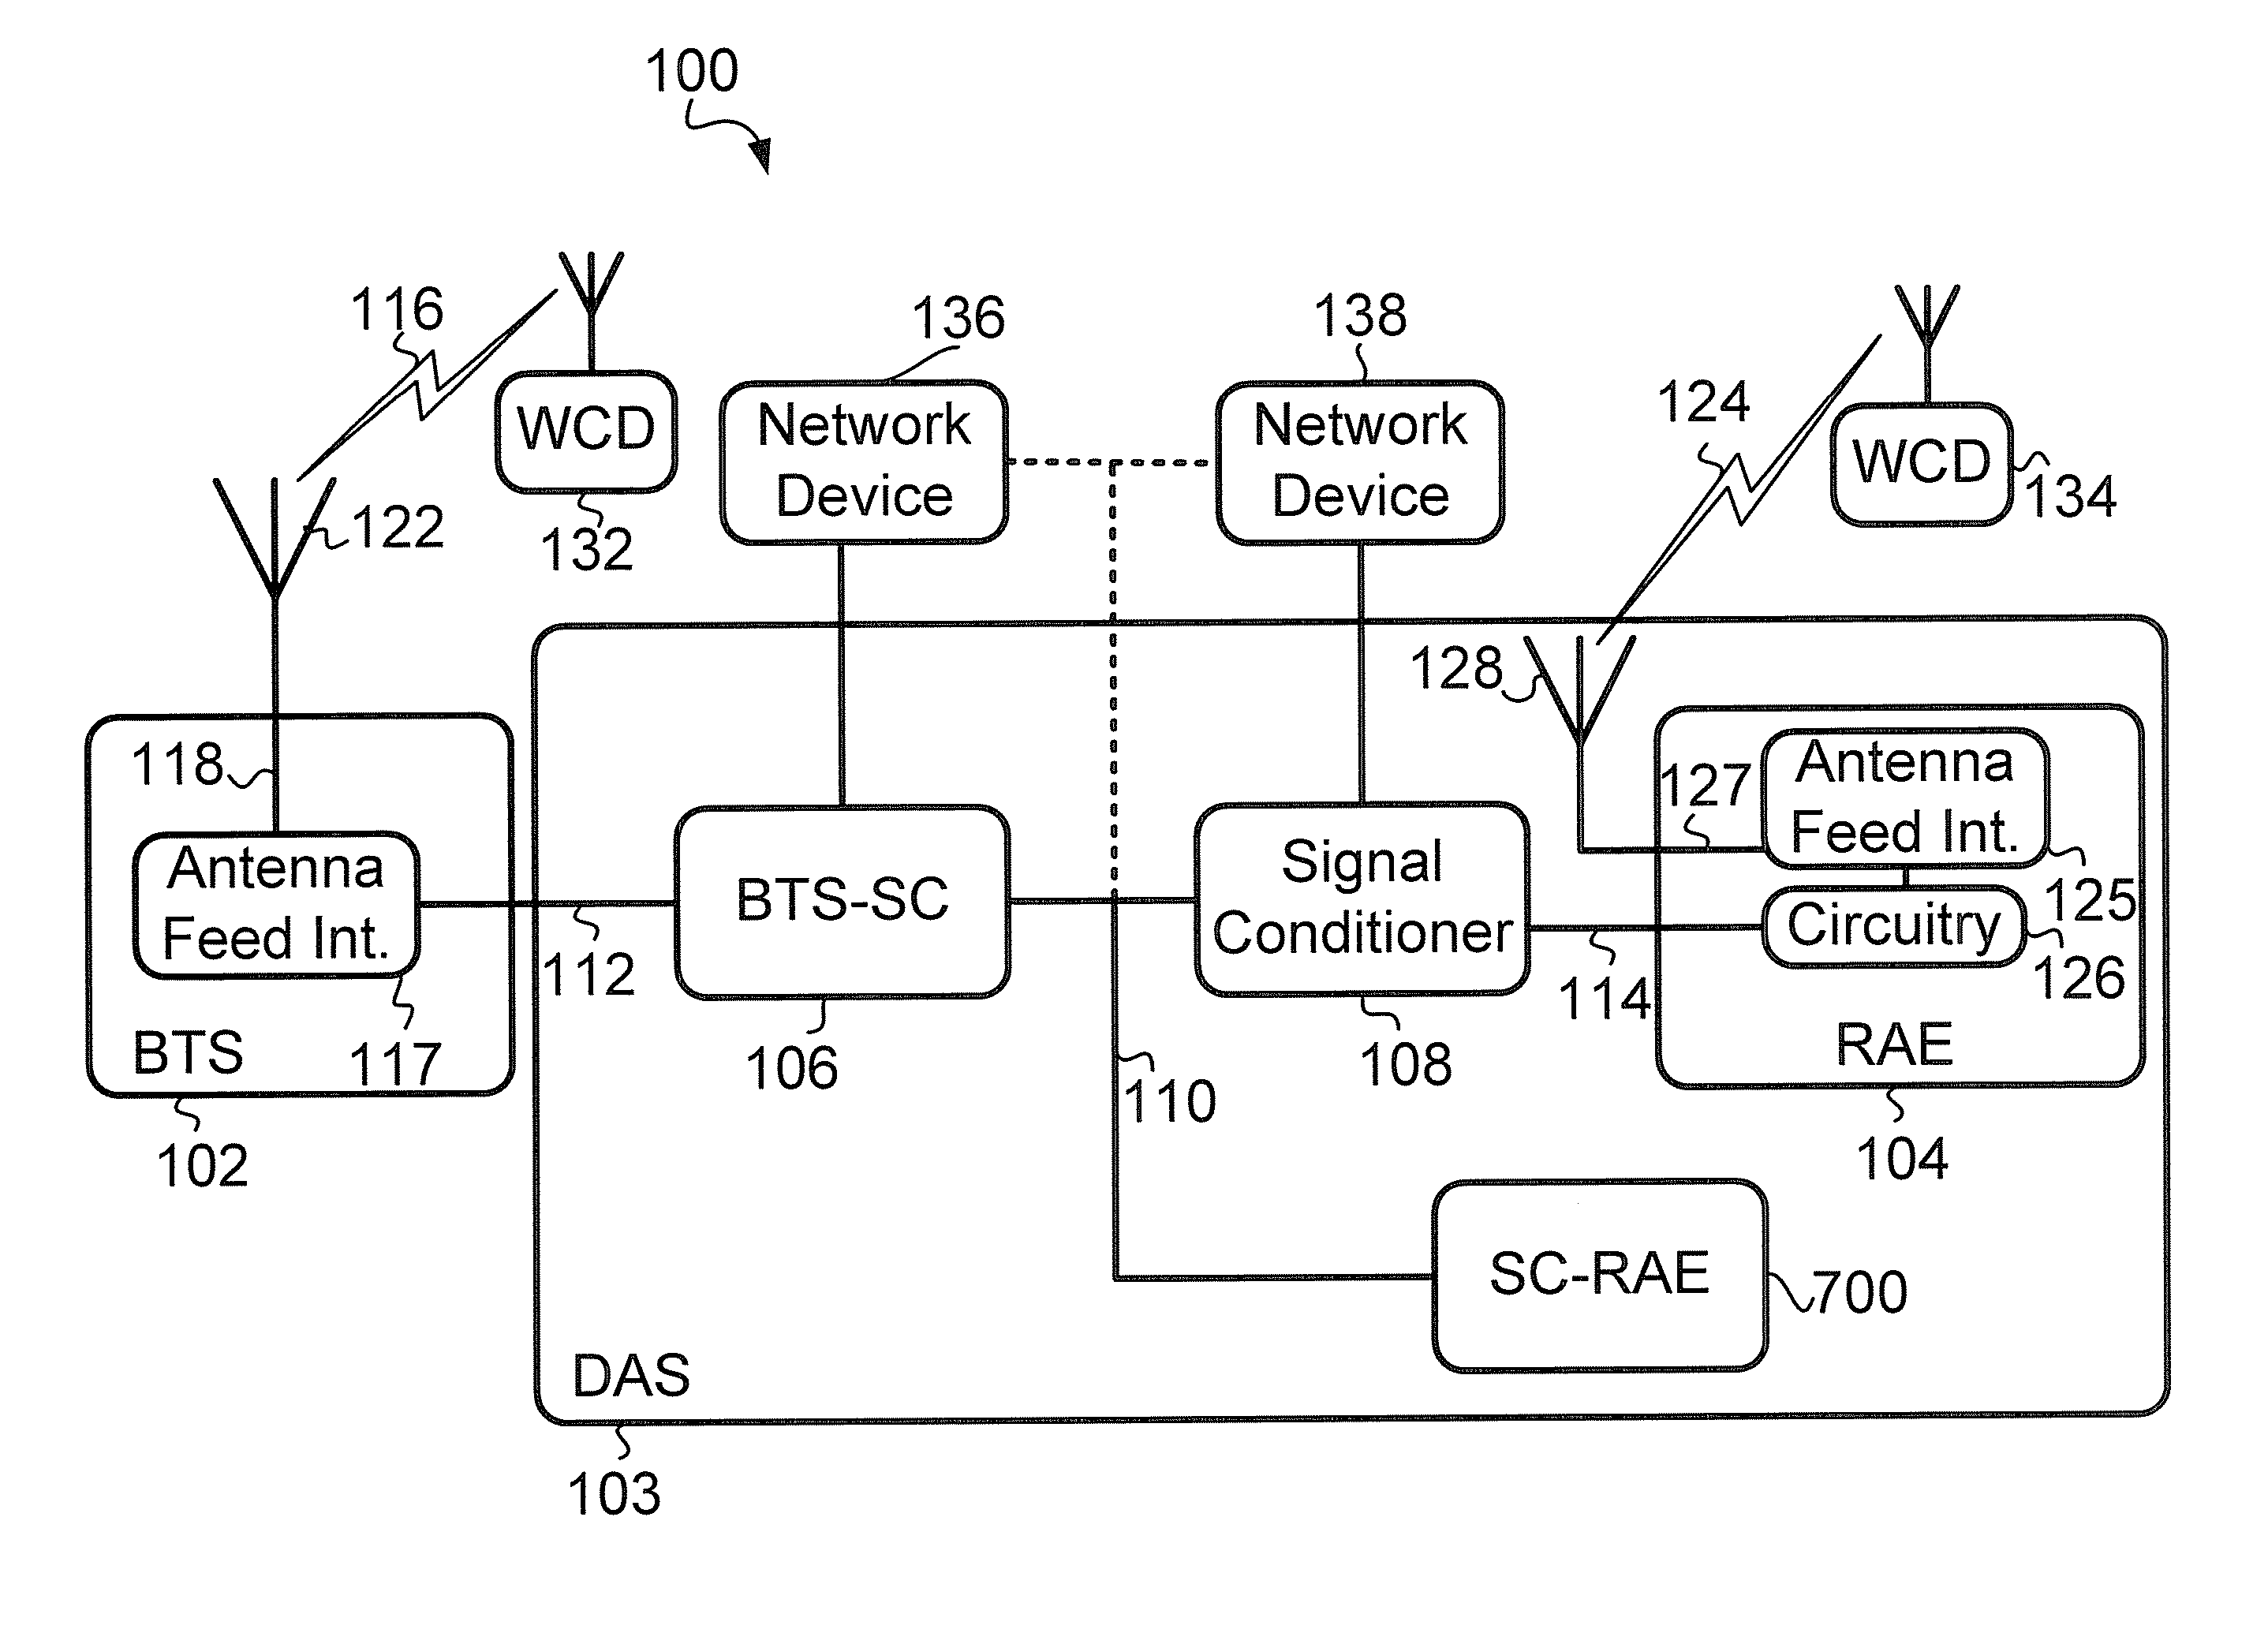 System and method for communicating a combined digital signal for wireless service via integrated hybrid fiber coax and power line communication devices for a distributed antenna system over shared broadband media